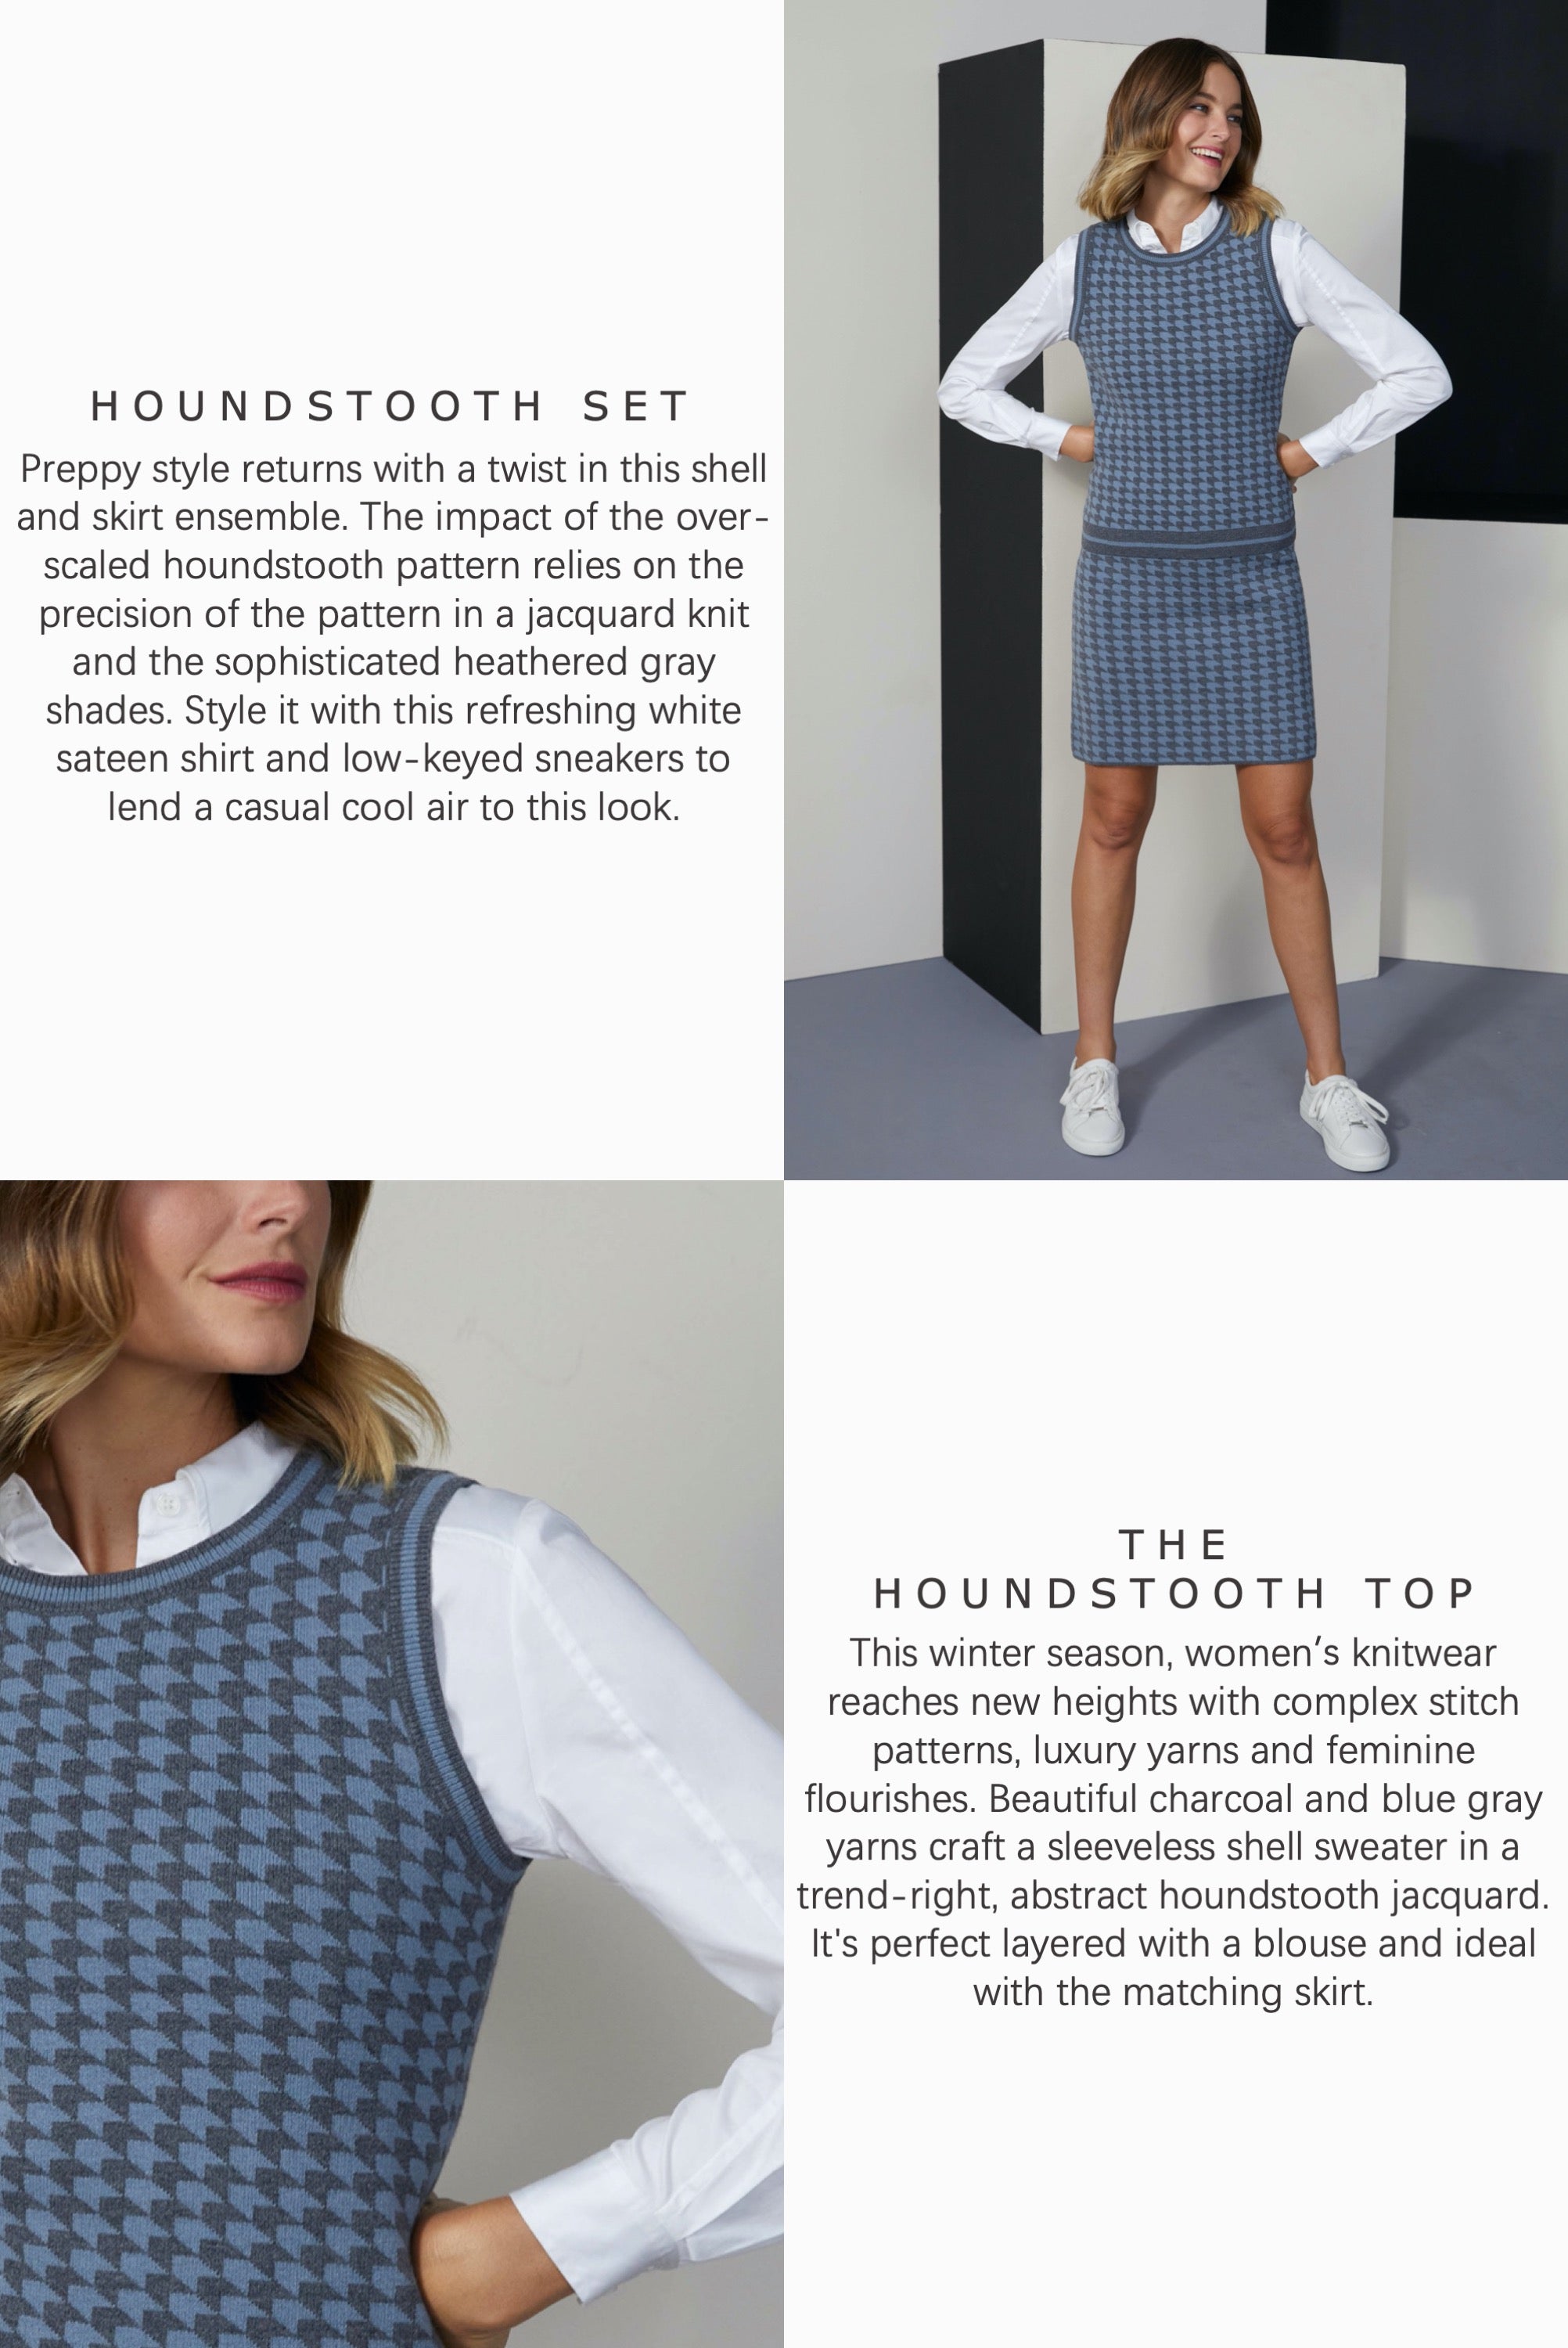 THE HOUNDSTOOTH SET